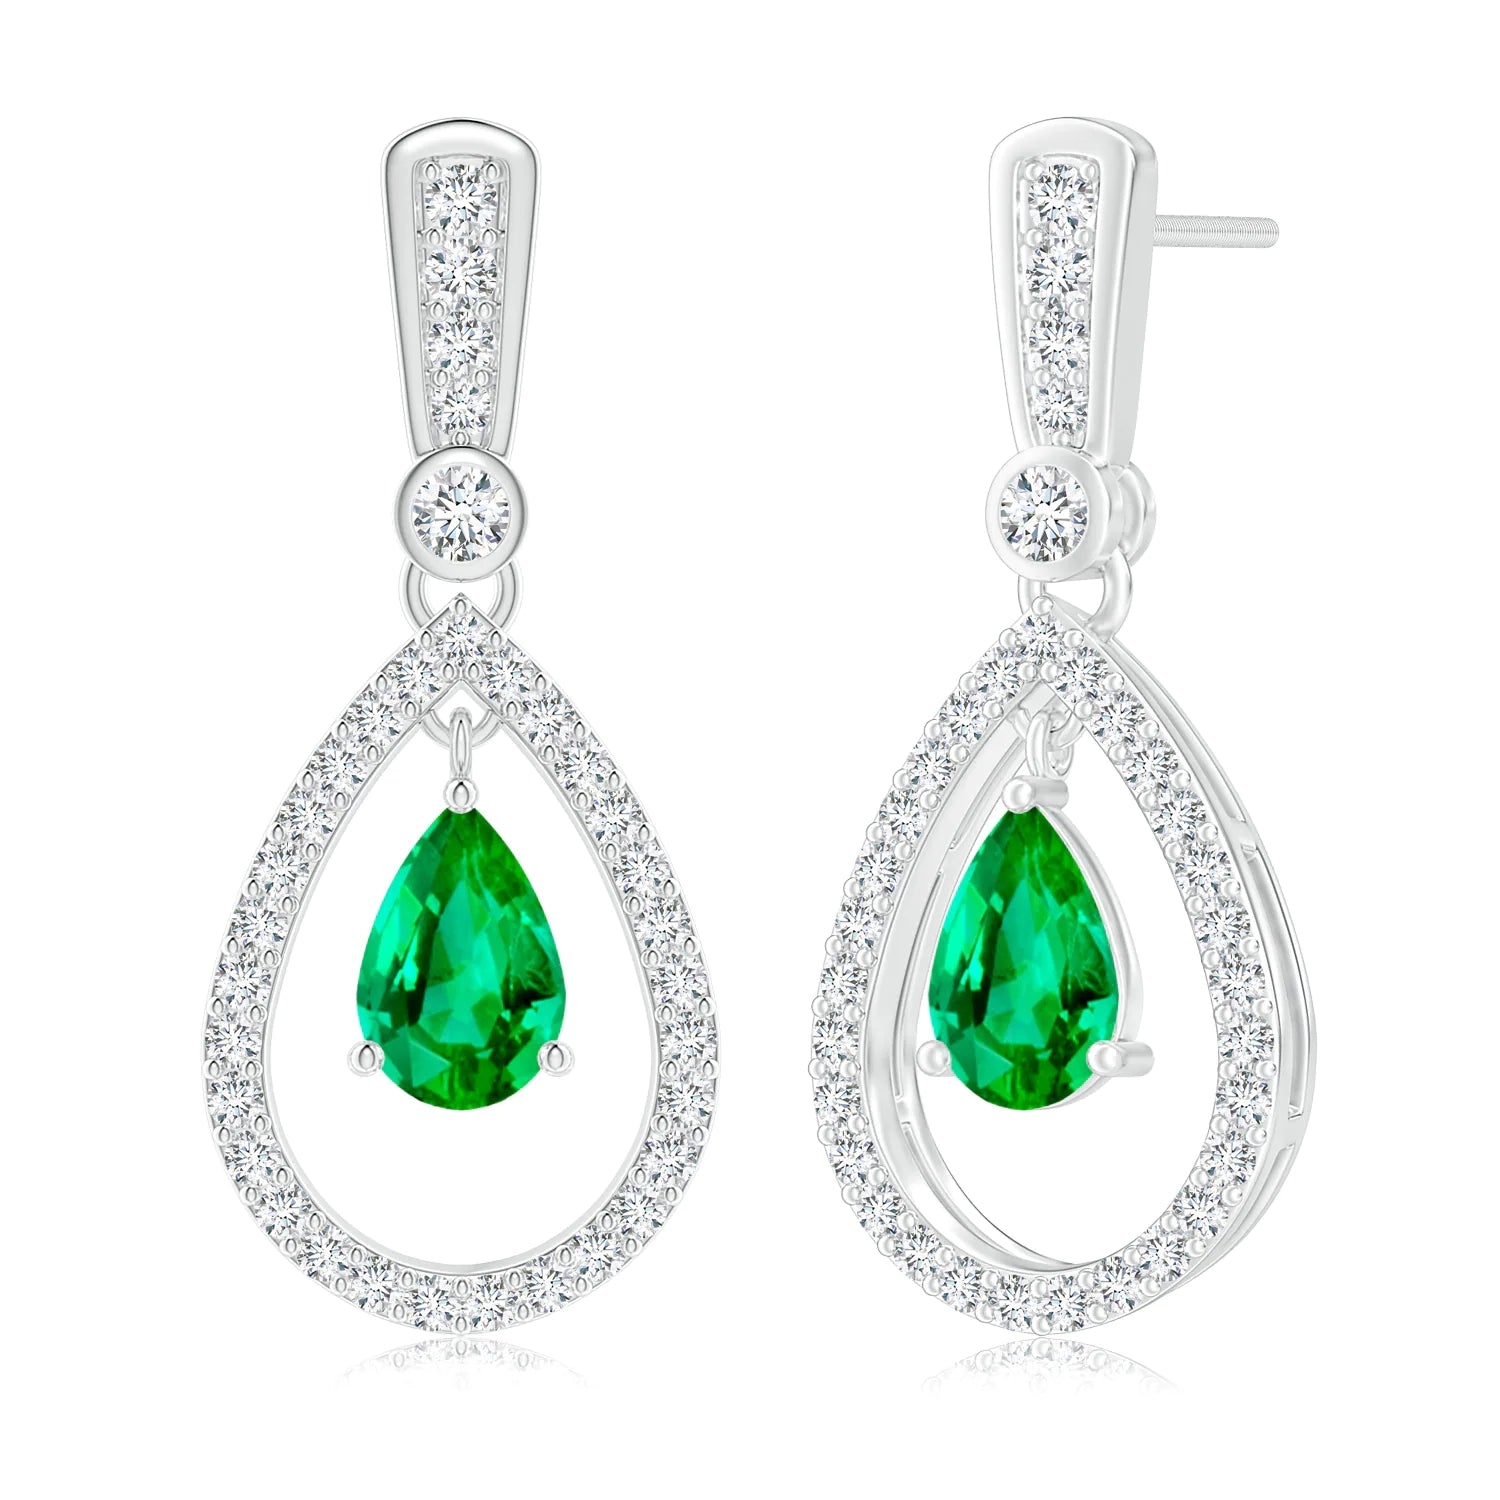 1.49 CT. Pear Emerald Drop Earrings with Pavé Halo